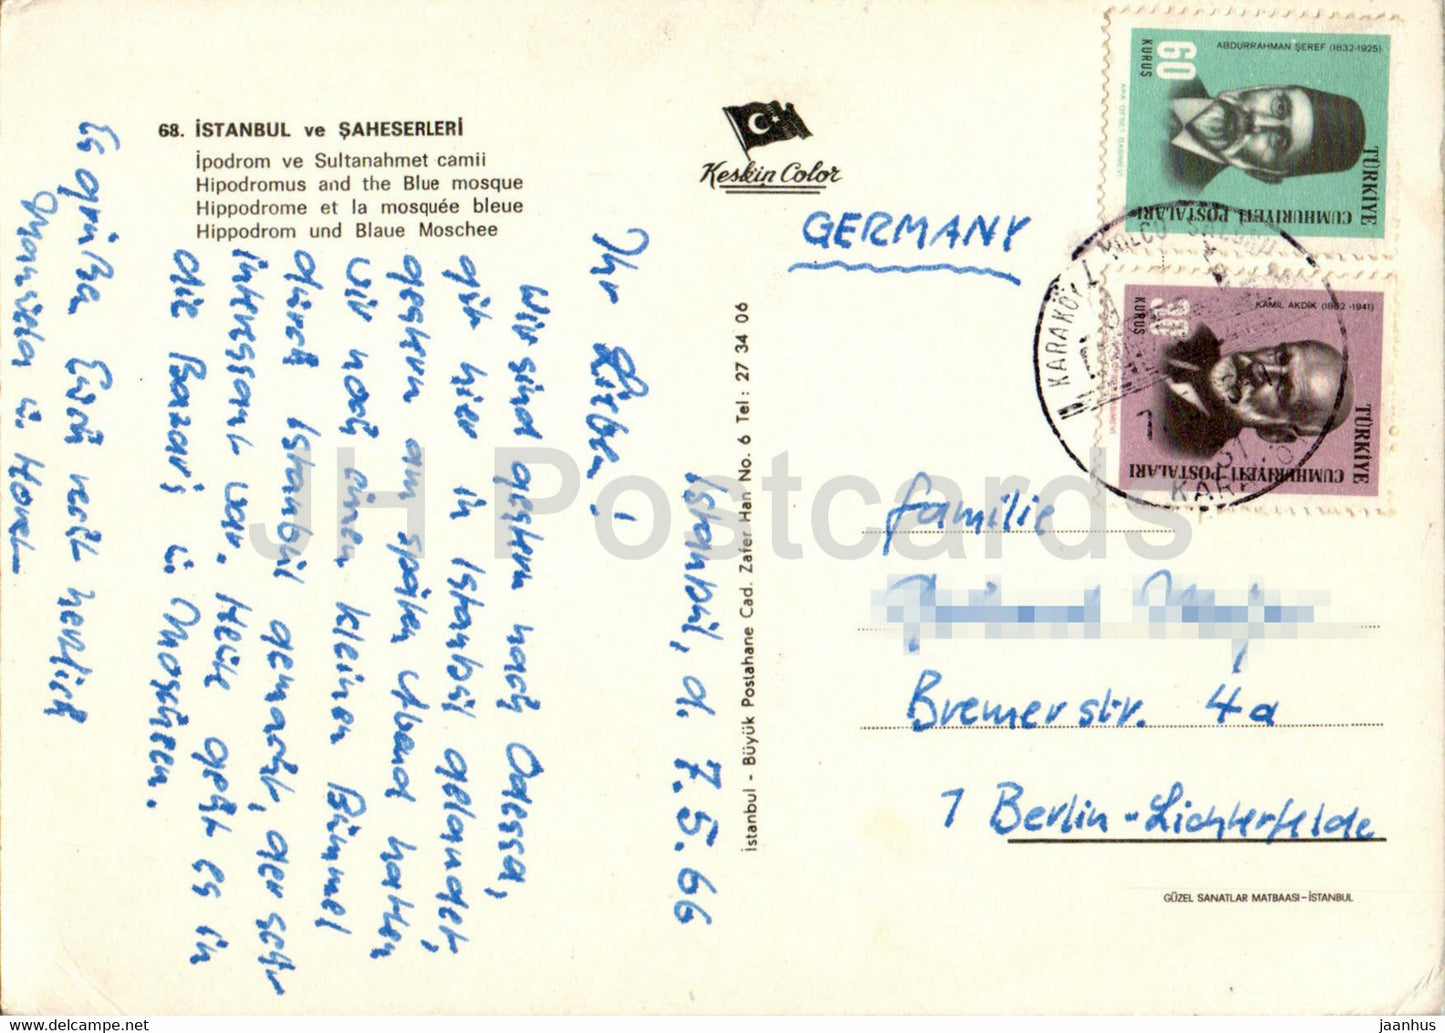 Istanbul - Hipodromus and the Blue mosque - 68 - 1966 - Turkey - used